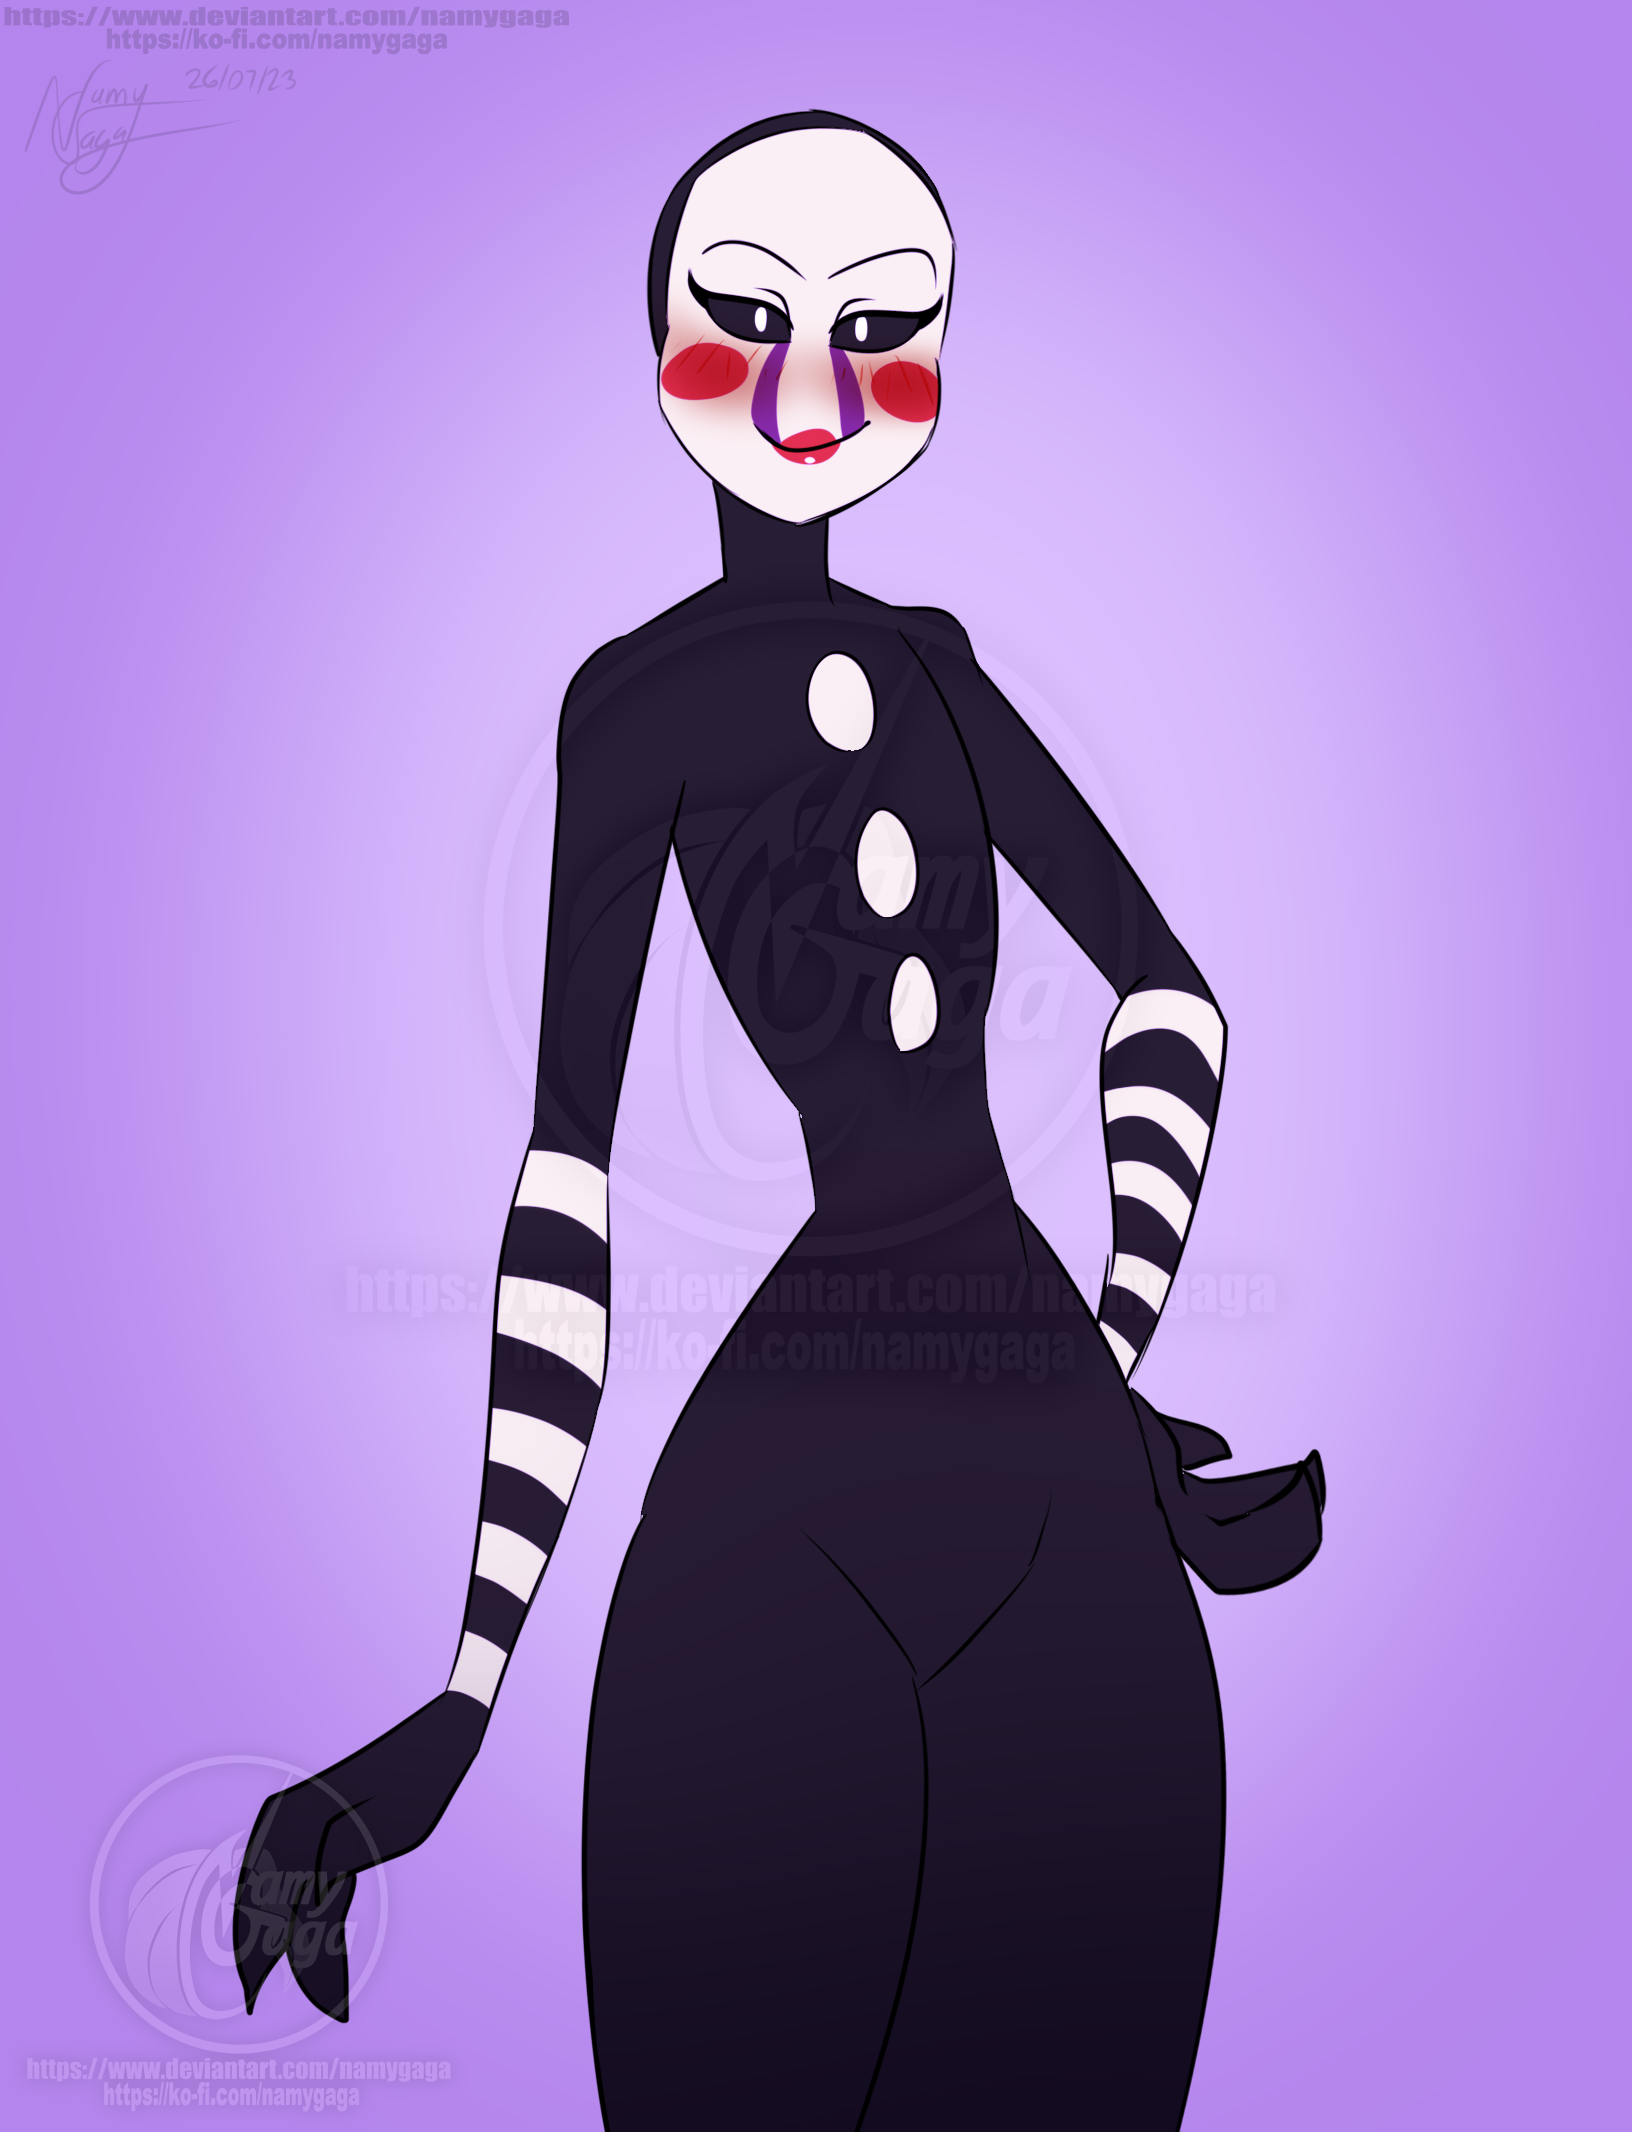 COMMISSION_Thicc Marionette by NamyGaga on DeviantArt